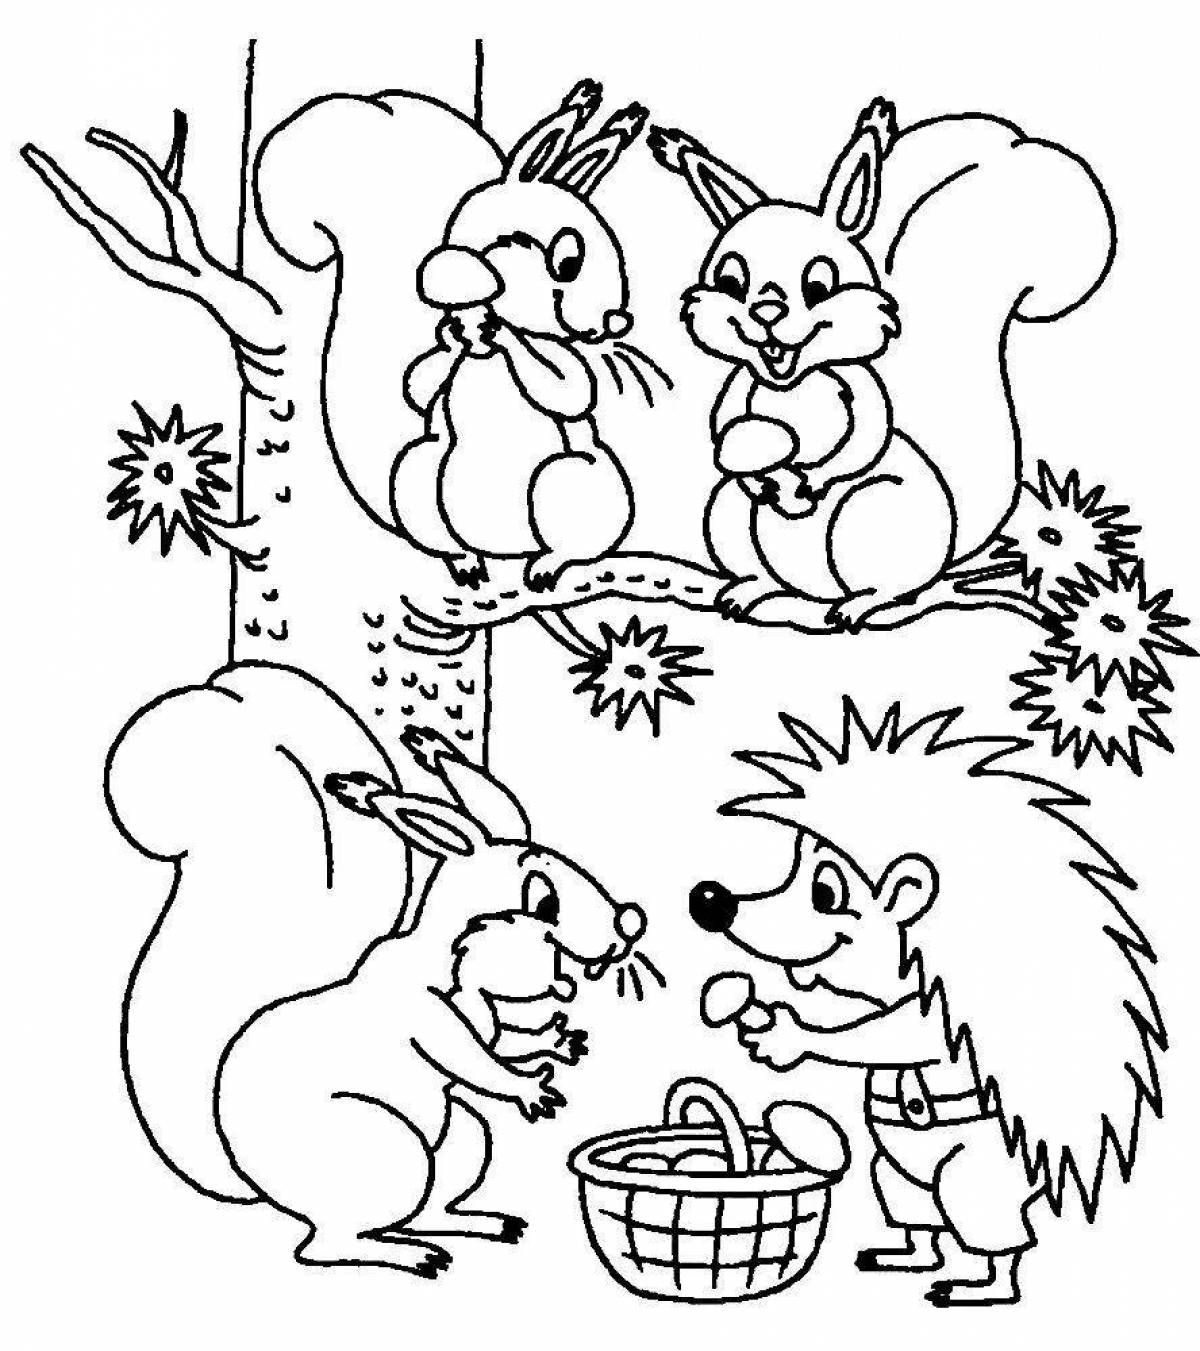 Fun coloring pages animals in winter